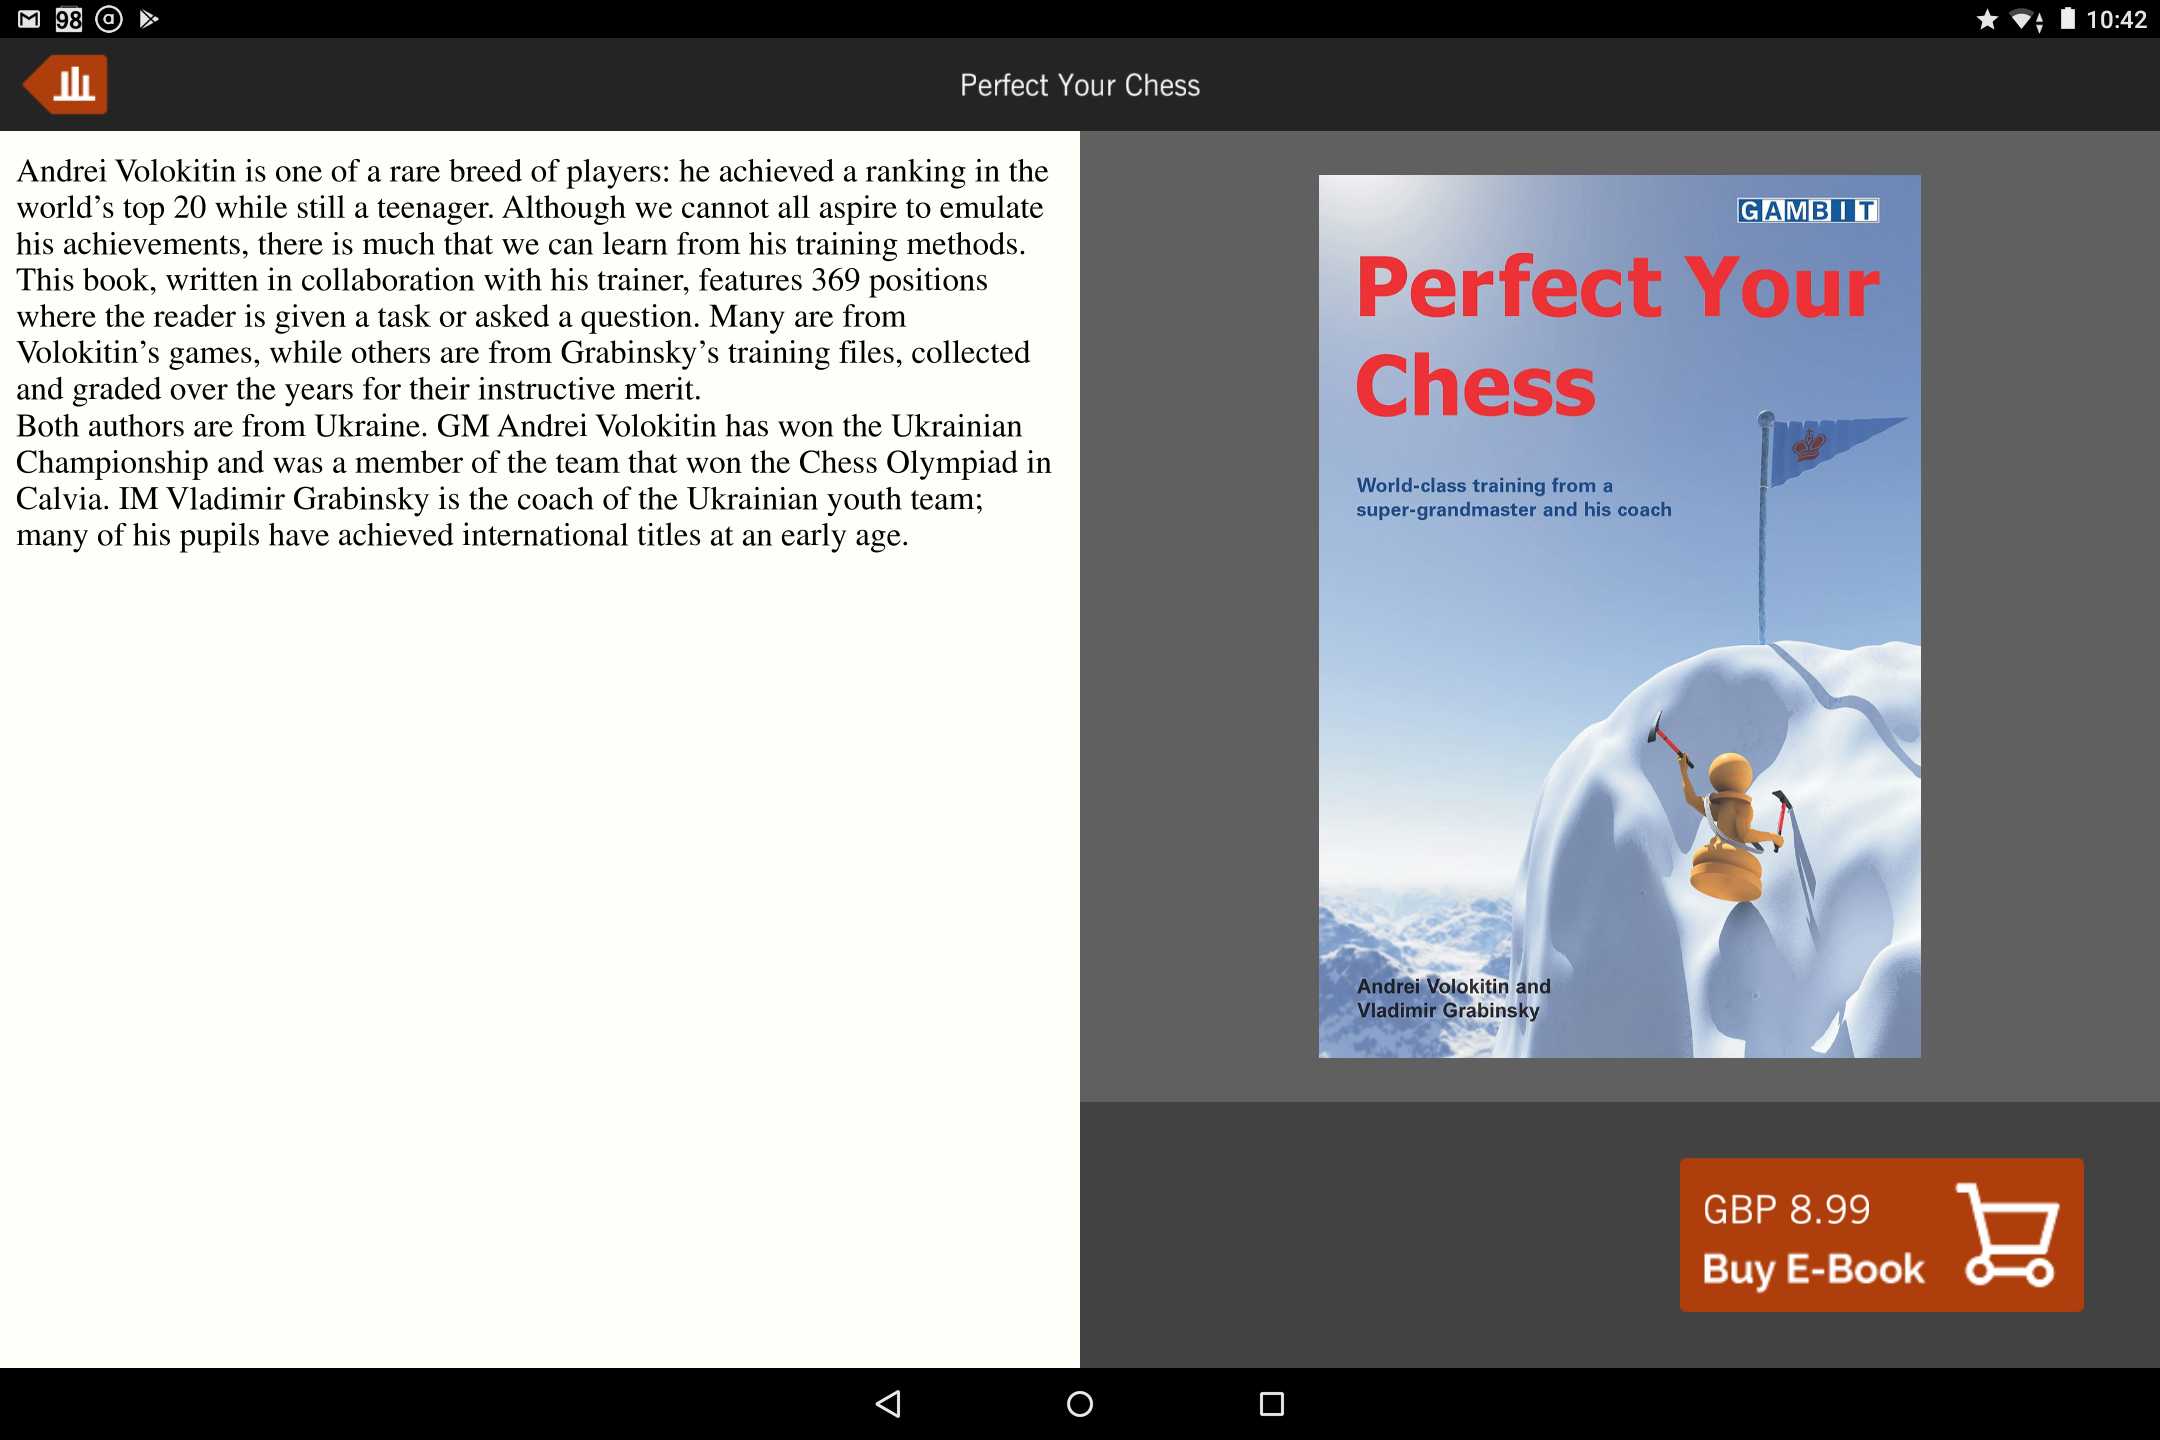 Perfect Your Chess book details